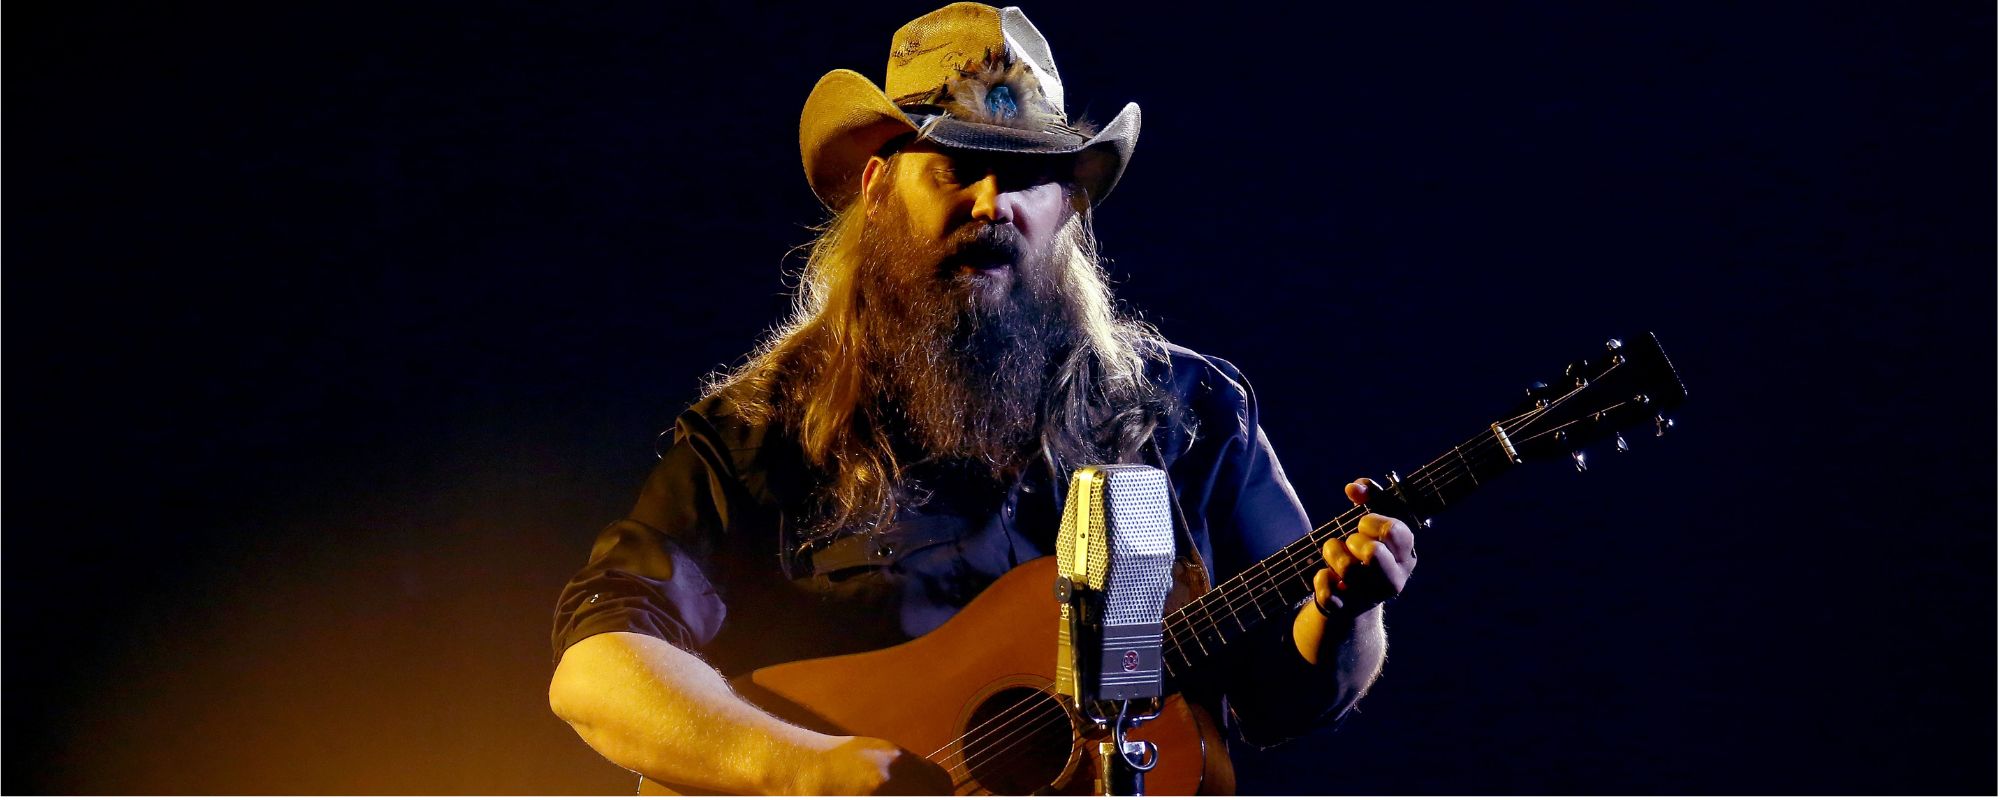 Chris Stapleton Reveals Why It Took Him So Long to Record “Higher” and How He Found His Voice on ‘Today’